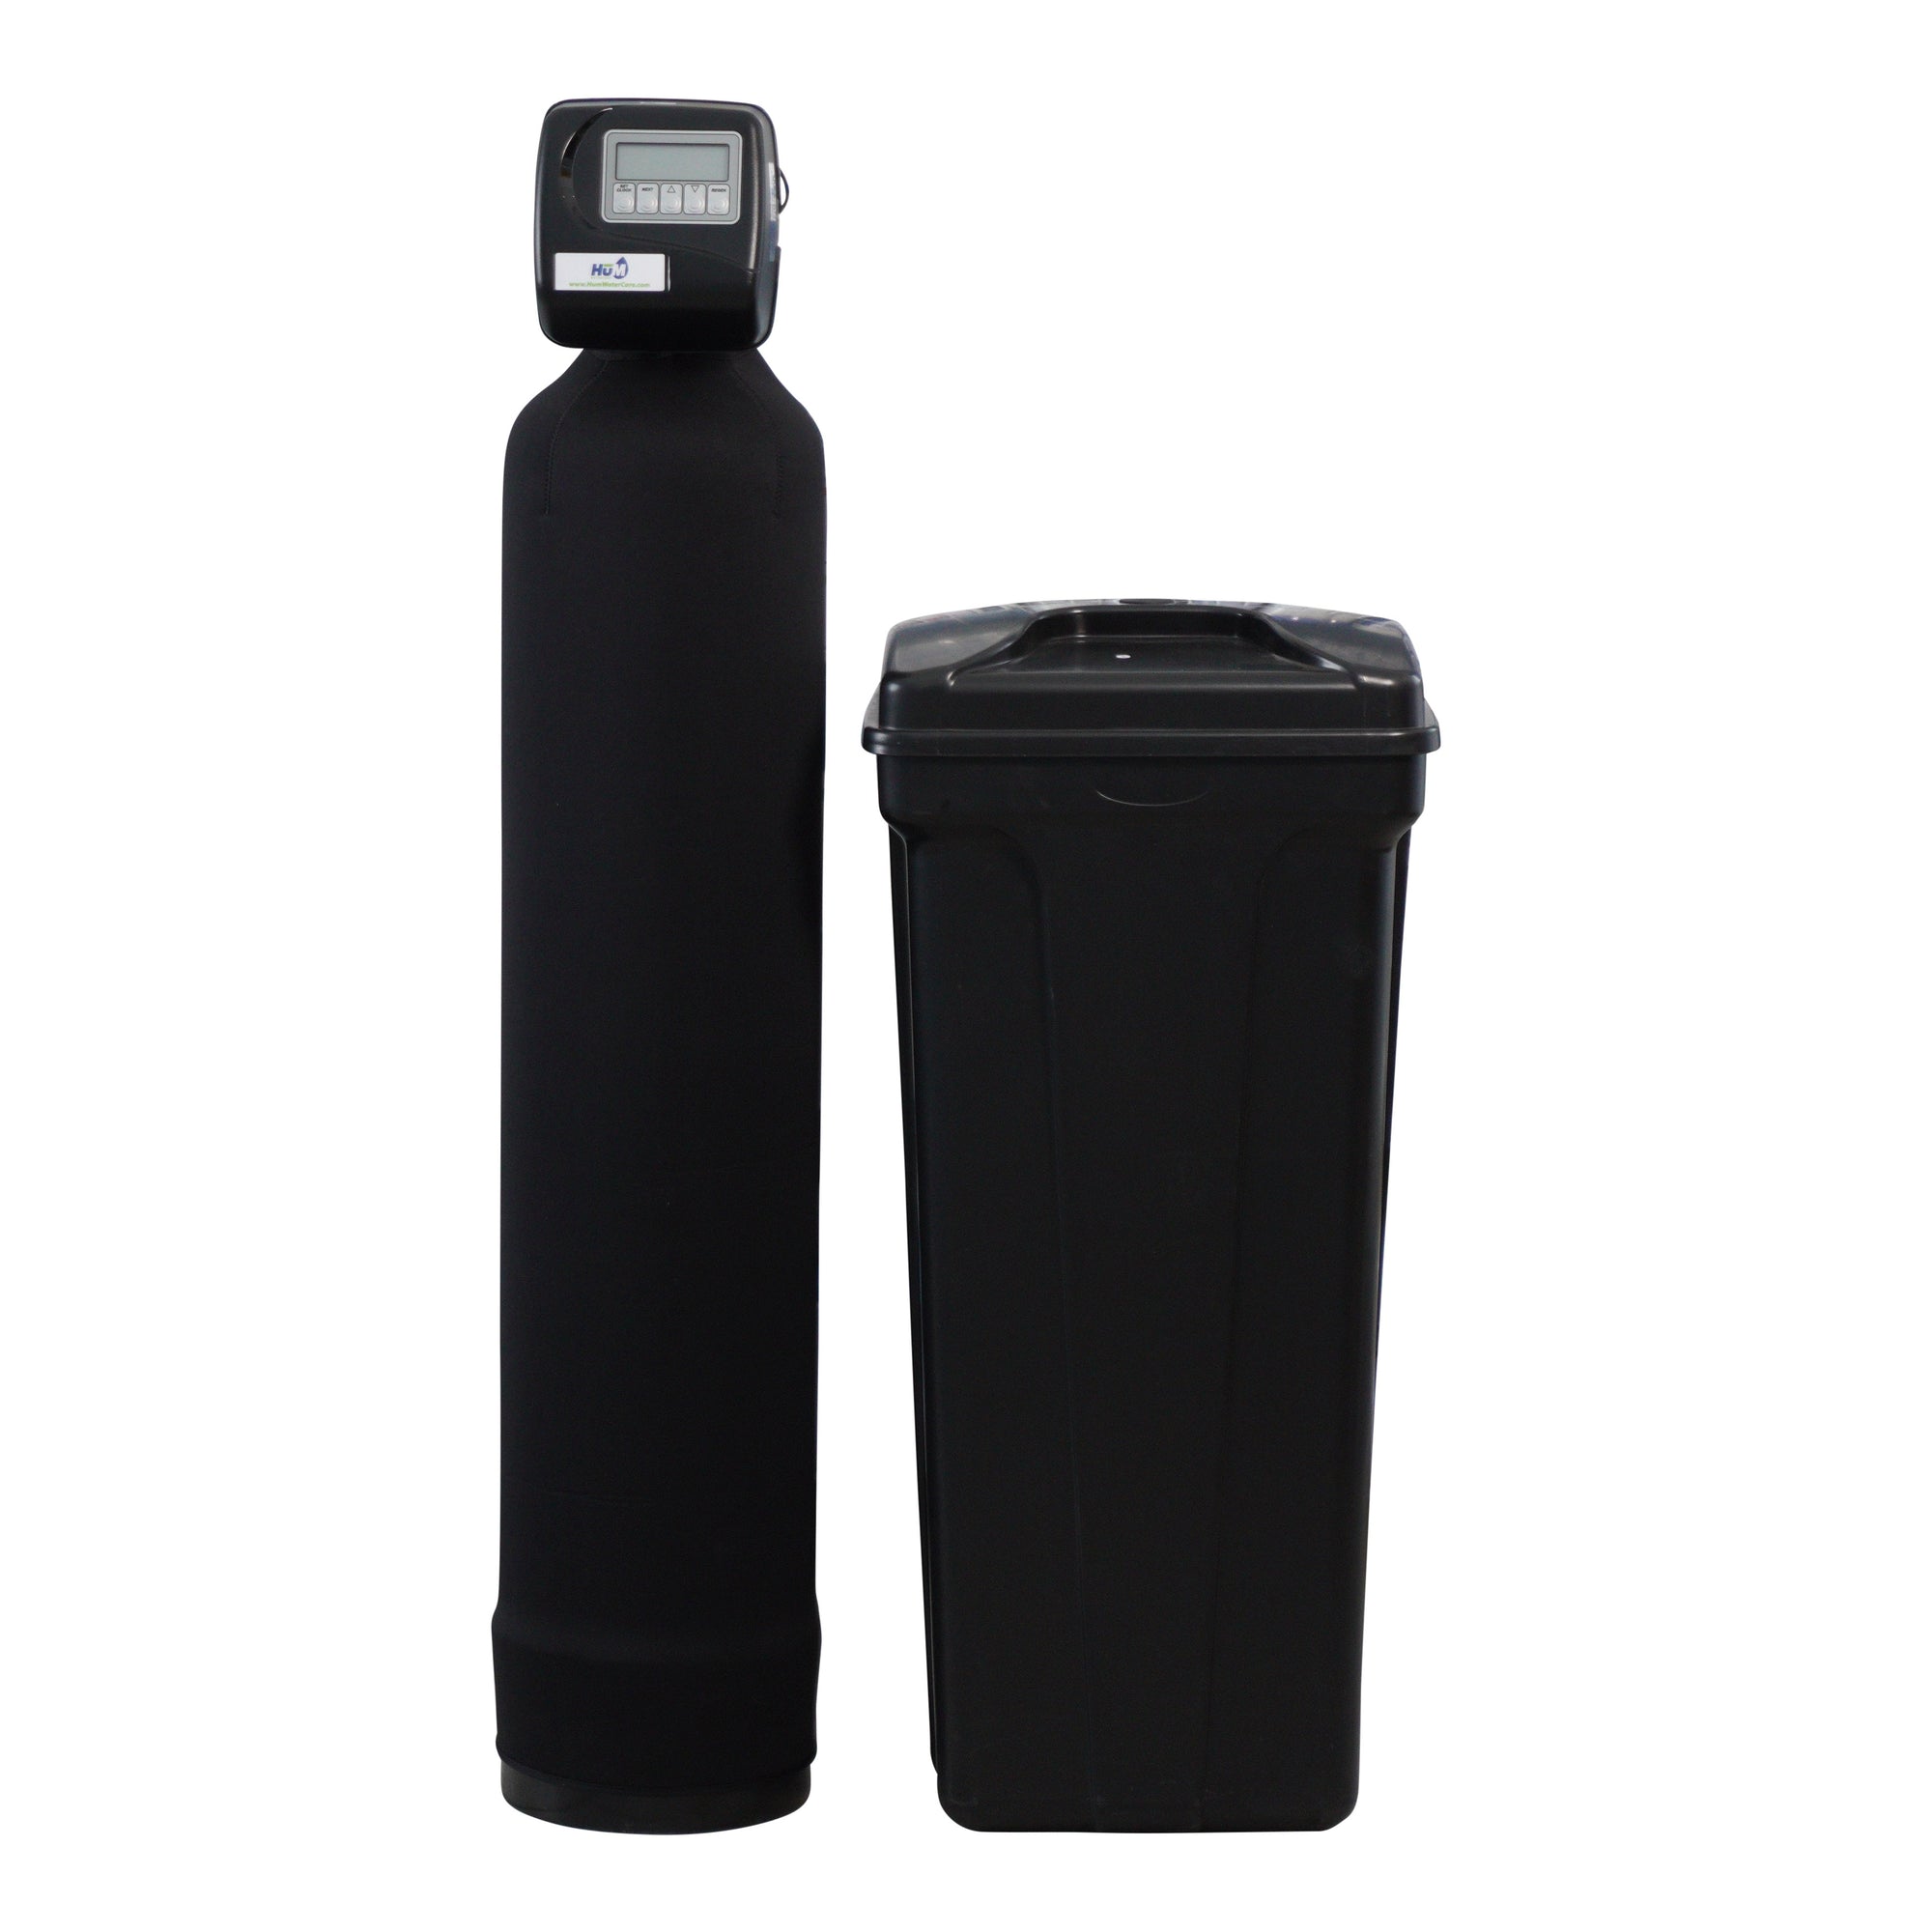 PRE or POST FILL WATER SOFTENER - Which one is BEST?